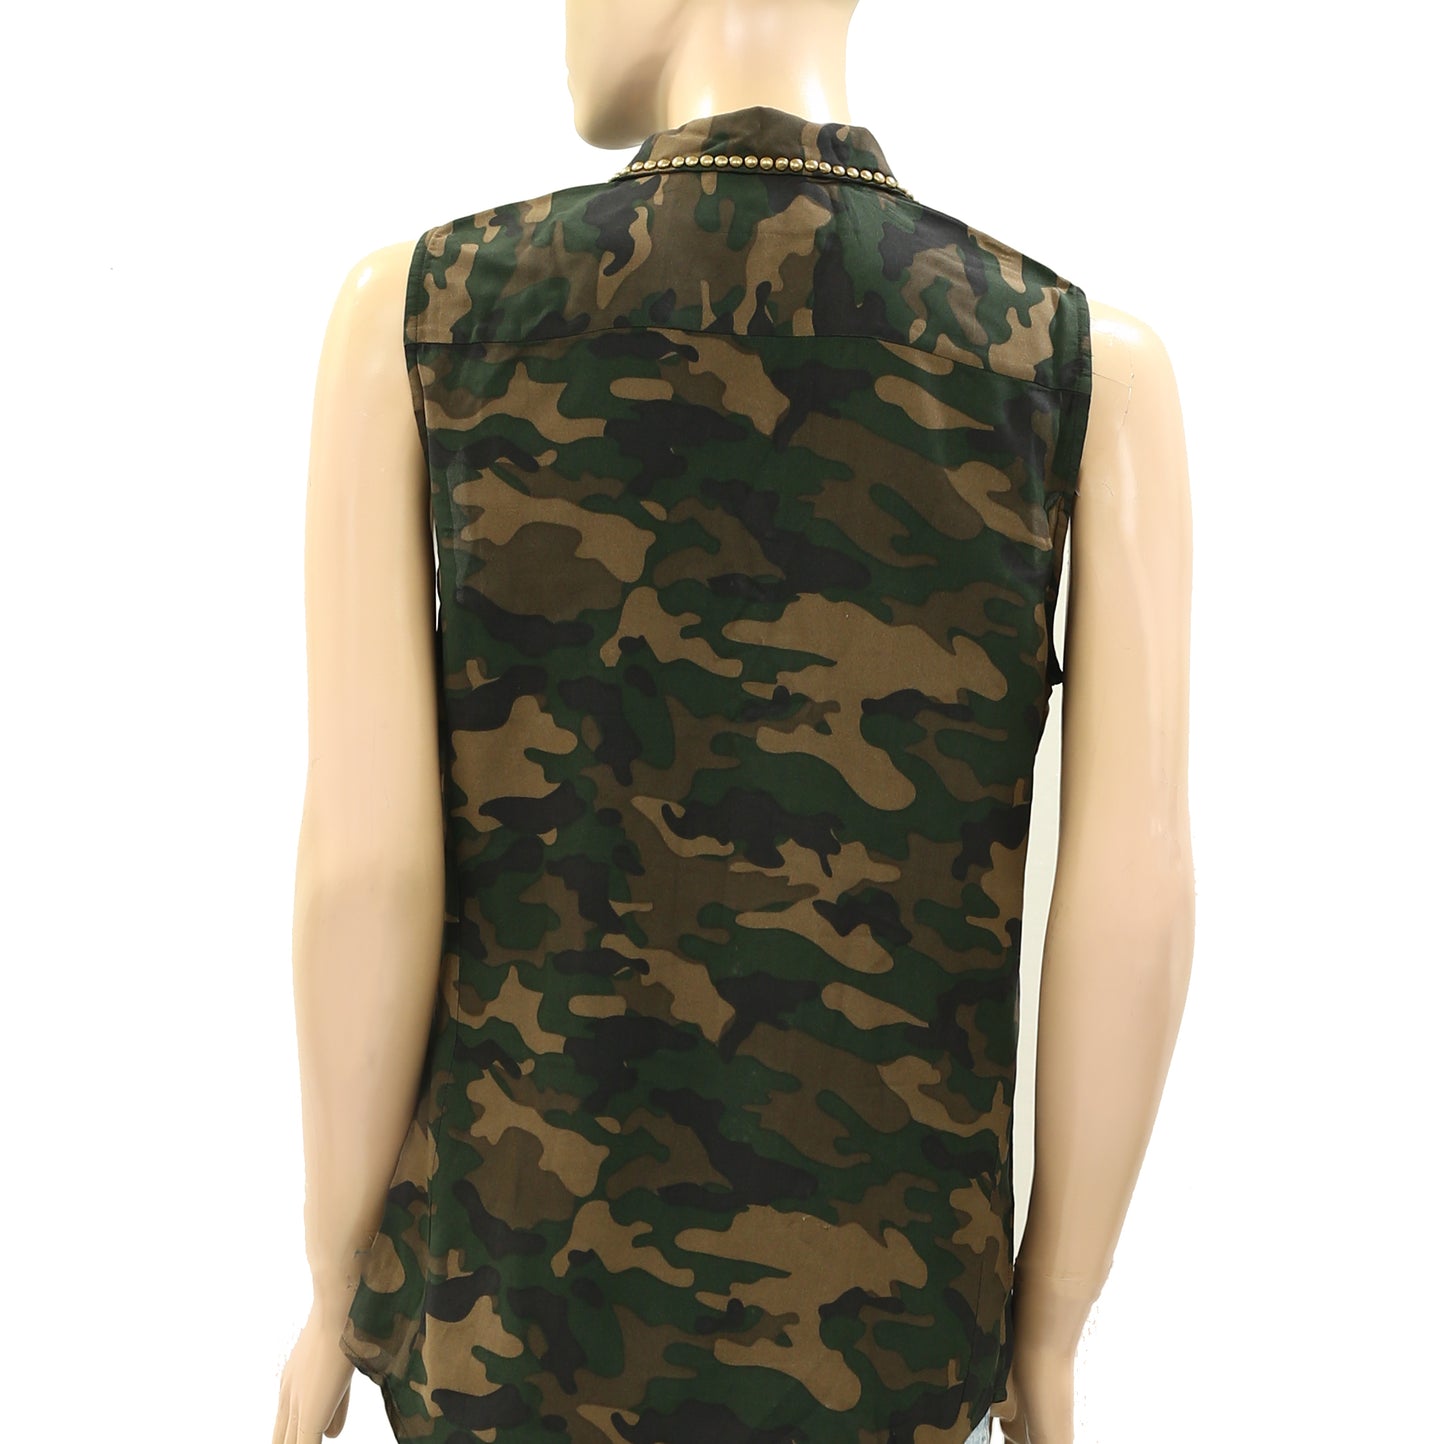 Laurence Dolige Paris Military Printed Tunic Top